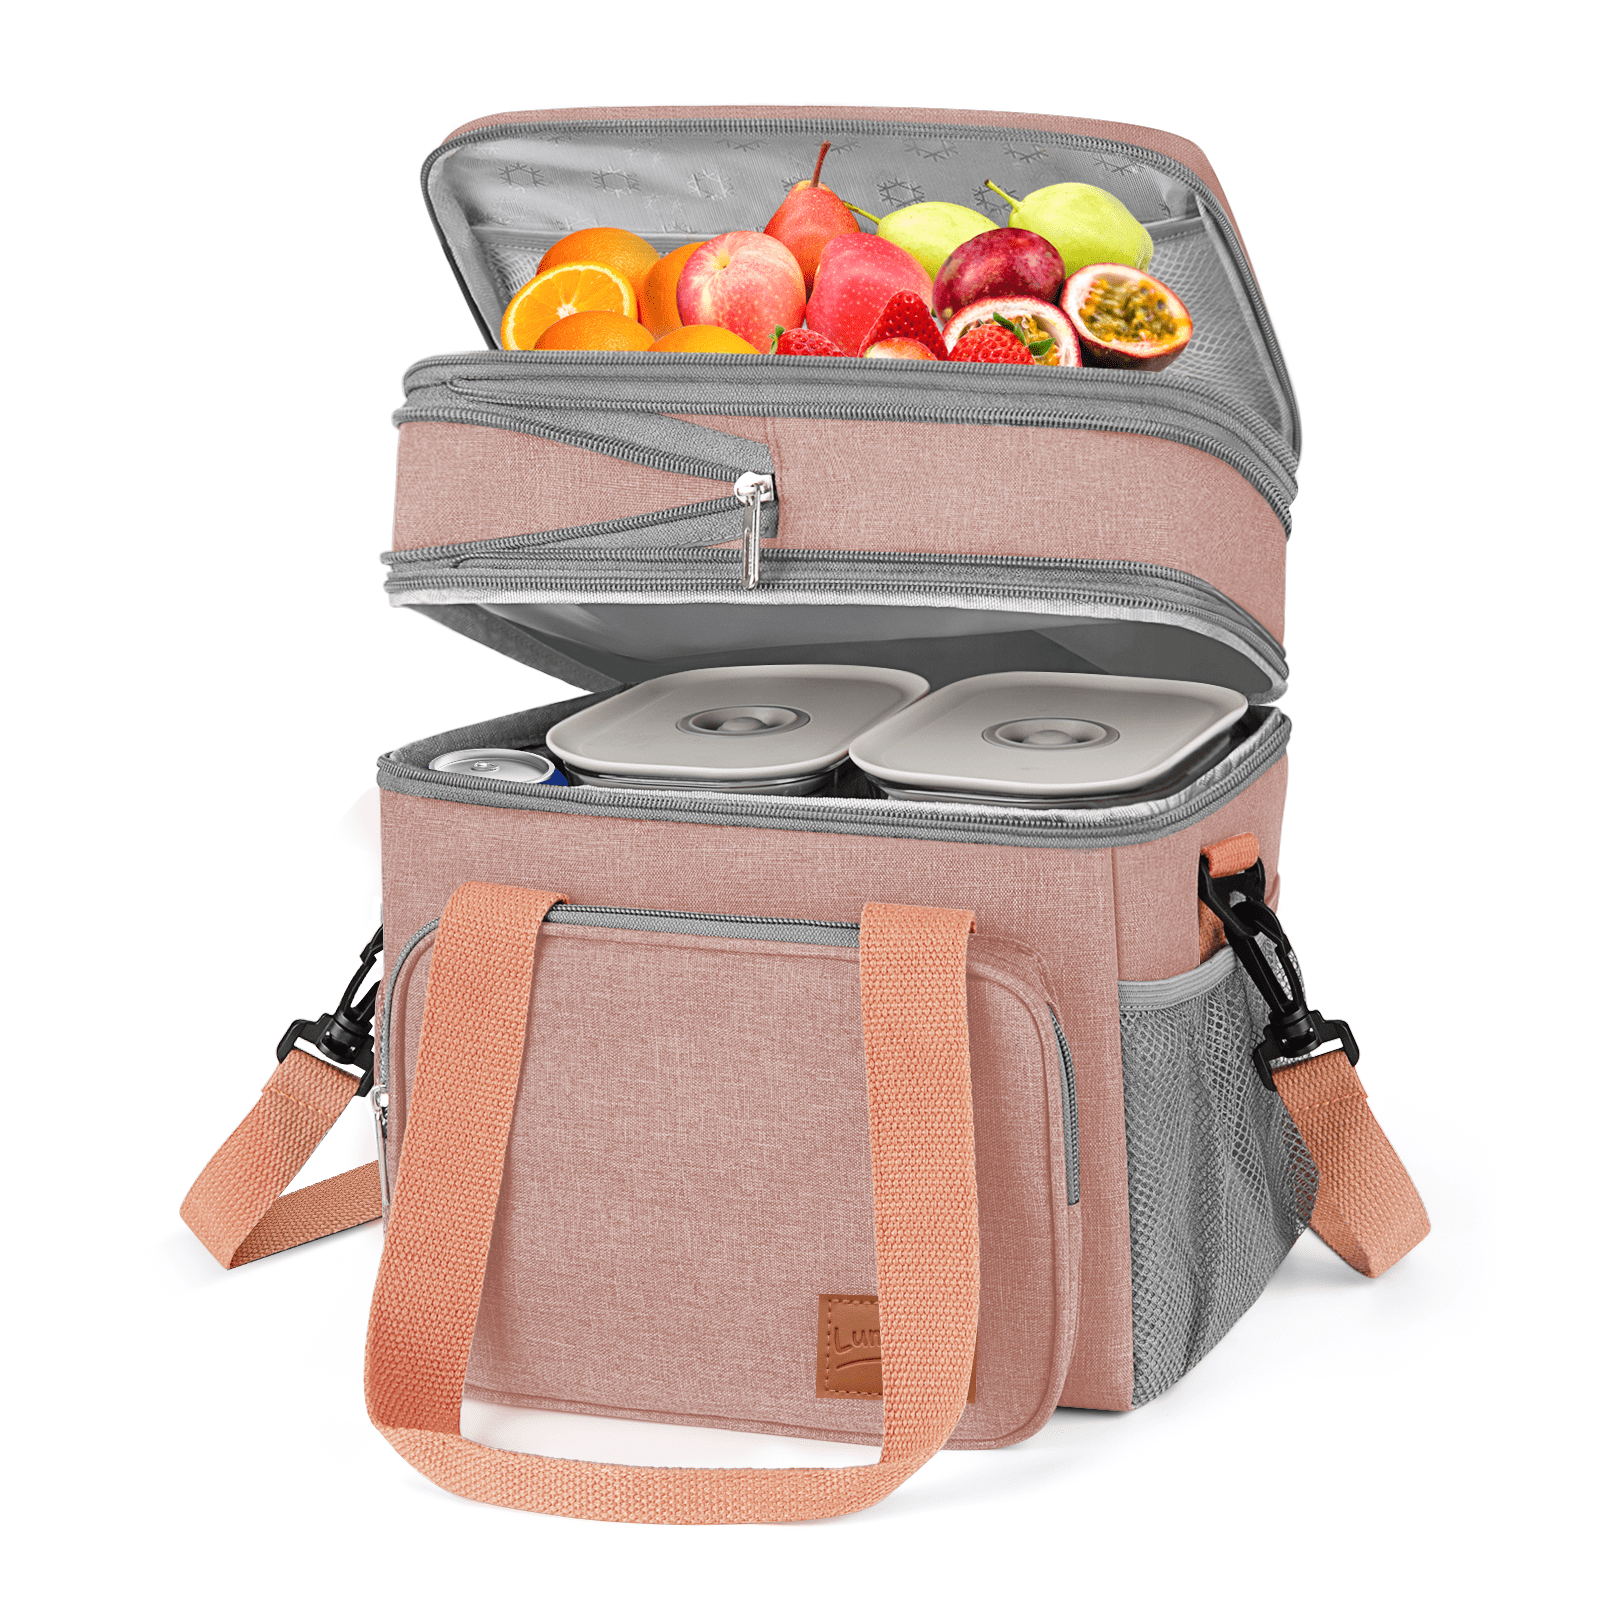 Flexible Hand Lunchbag Mediumsize COMBO for office, School,Picnic  (Multicolour,Beige,10L) Waterproof Lunch Bag